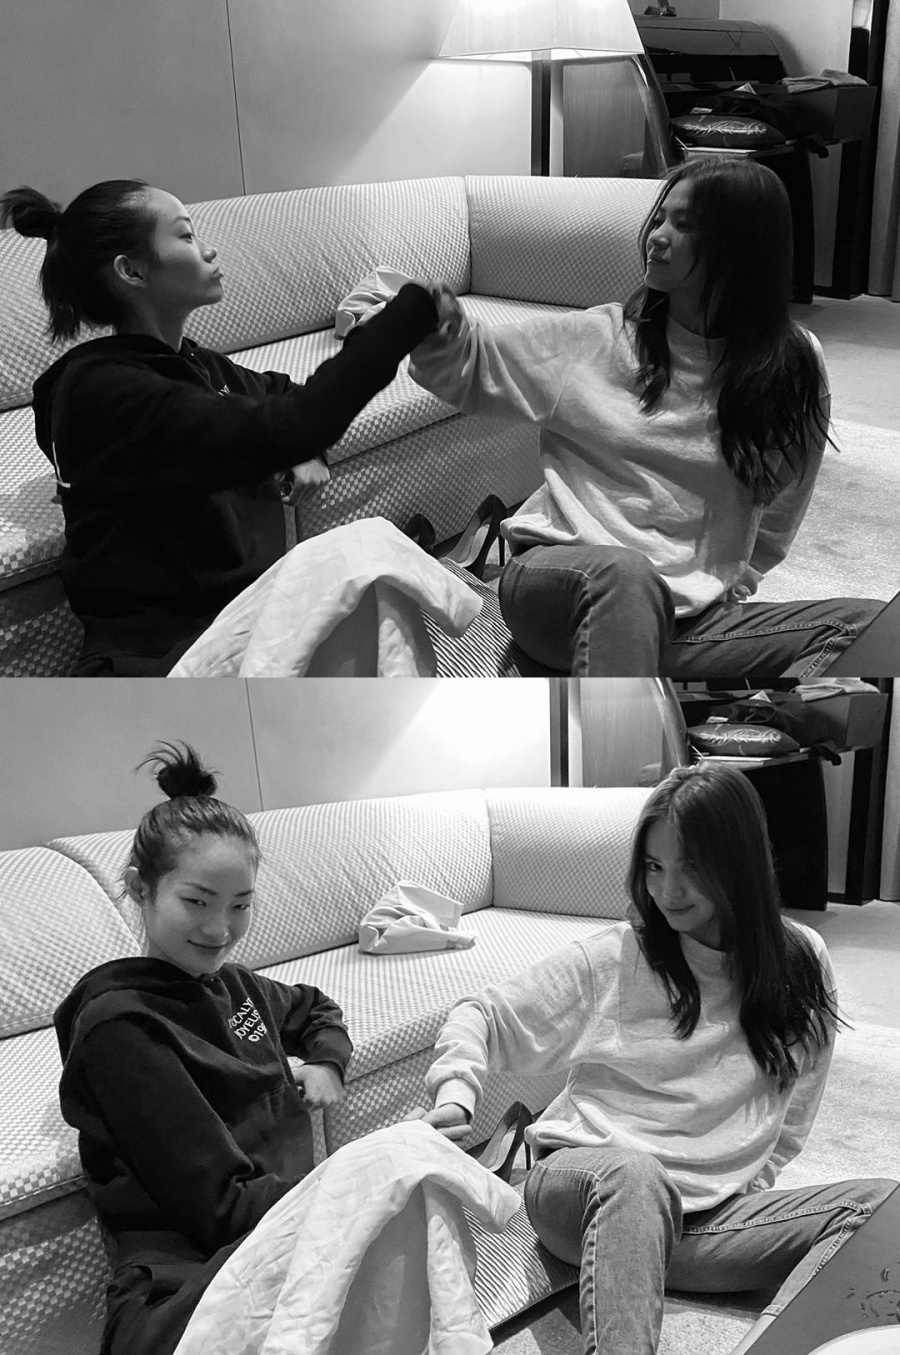 Actor Song Hye-kyo and Model Shin Hyun-ji are attracting attention.Stylist Chae Hyun-suk posted a hashtag post on Song Hye-kyo and Shin Hyun-ji on his 23rd day, saying, My love, my family, I am happy if I laugh.The photos he released showed Song Hye-kyo and Shin Hyun-ji having a pleasant time in comfortable costumes, and those who leaned on the sofa looked at the camera together and looked at each other.In particular, he is pointing his fist at his face with a playful expression, and he is laughing. In the post, Shin Hyun-ji commented, I love you.Among these two people, Song Hye-kyo was born in 1981 and Shin Hyun-ji was born in 1996, and they are attracting more attention by showing friendship beyond the age of 15.The two of them are showing off their same age chemi so that they can not believe the age difference of 15 years.Song Hye-kyo attended the 2020 Autumn Collection in Palazzo del Giarchio, Milan, Italy, and Shin Hyun-ji became a Model for the famous brand 2020 F/W collector show in Versace, Etro, Fendi and Ferragamo in Milan, Italy.It seems that those who met in Milan expressed their gratitude.Their friendship was also revealed through Shin Hyunji SNS. On this day, Shin Hyunji said to his instagram, When will it be beautiful?And posted two photos of Song Hye-kyo and the self-portrait taken with Song Hye-kyo.In the photo, Song Hye-kyo and Shin Hyun-ji wink, while they are showing friendship and friendship between the two with a humorous expression such as staring at the camera.On this day, Shin Hyun-ji said, It is a photo taken by Song Hye-kyo, and I posted another post by tagging Song Hye-kyos SNS account. In the photo, Song Hye-kyos affection for Shin Hyun-ji is felt.Song Hye-kyo recently donated Korean guides to Professor Seo Kyung-duk and the Brooklyn Museum in New York City, and is currently reviewing his next work.Shin Hyun-ji is the winner of the 2013 Challenge SuperModel Korea 4 and is currently active in world famous shows such as New York City, London, Italy, Milan and Paris, France.=